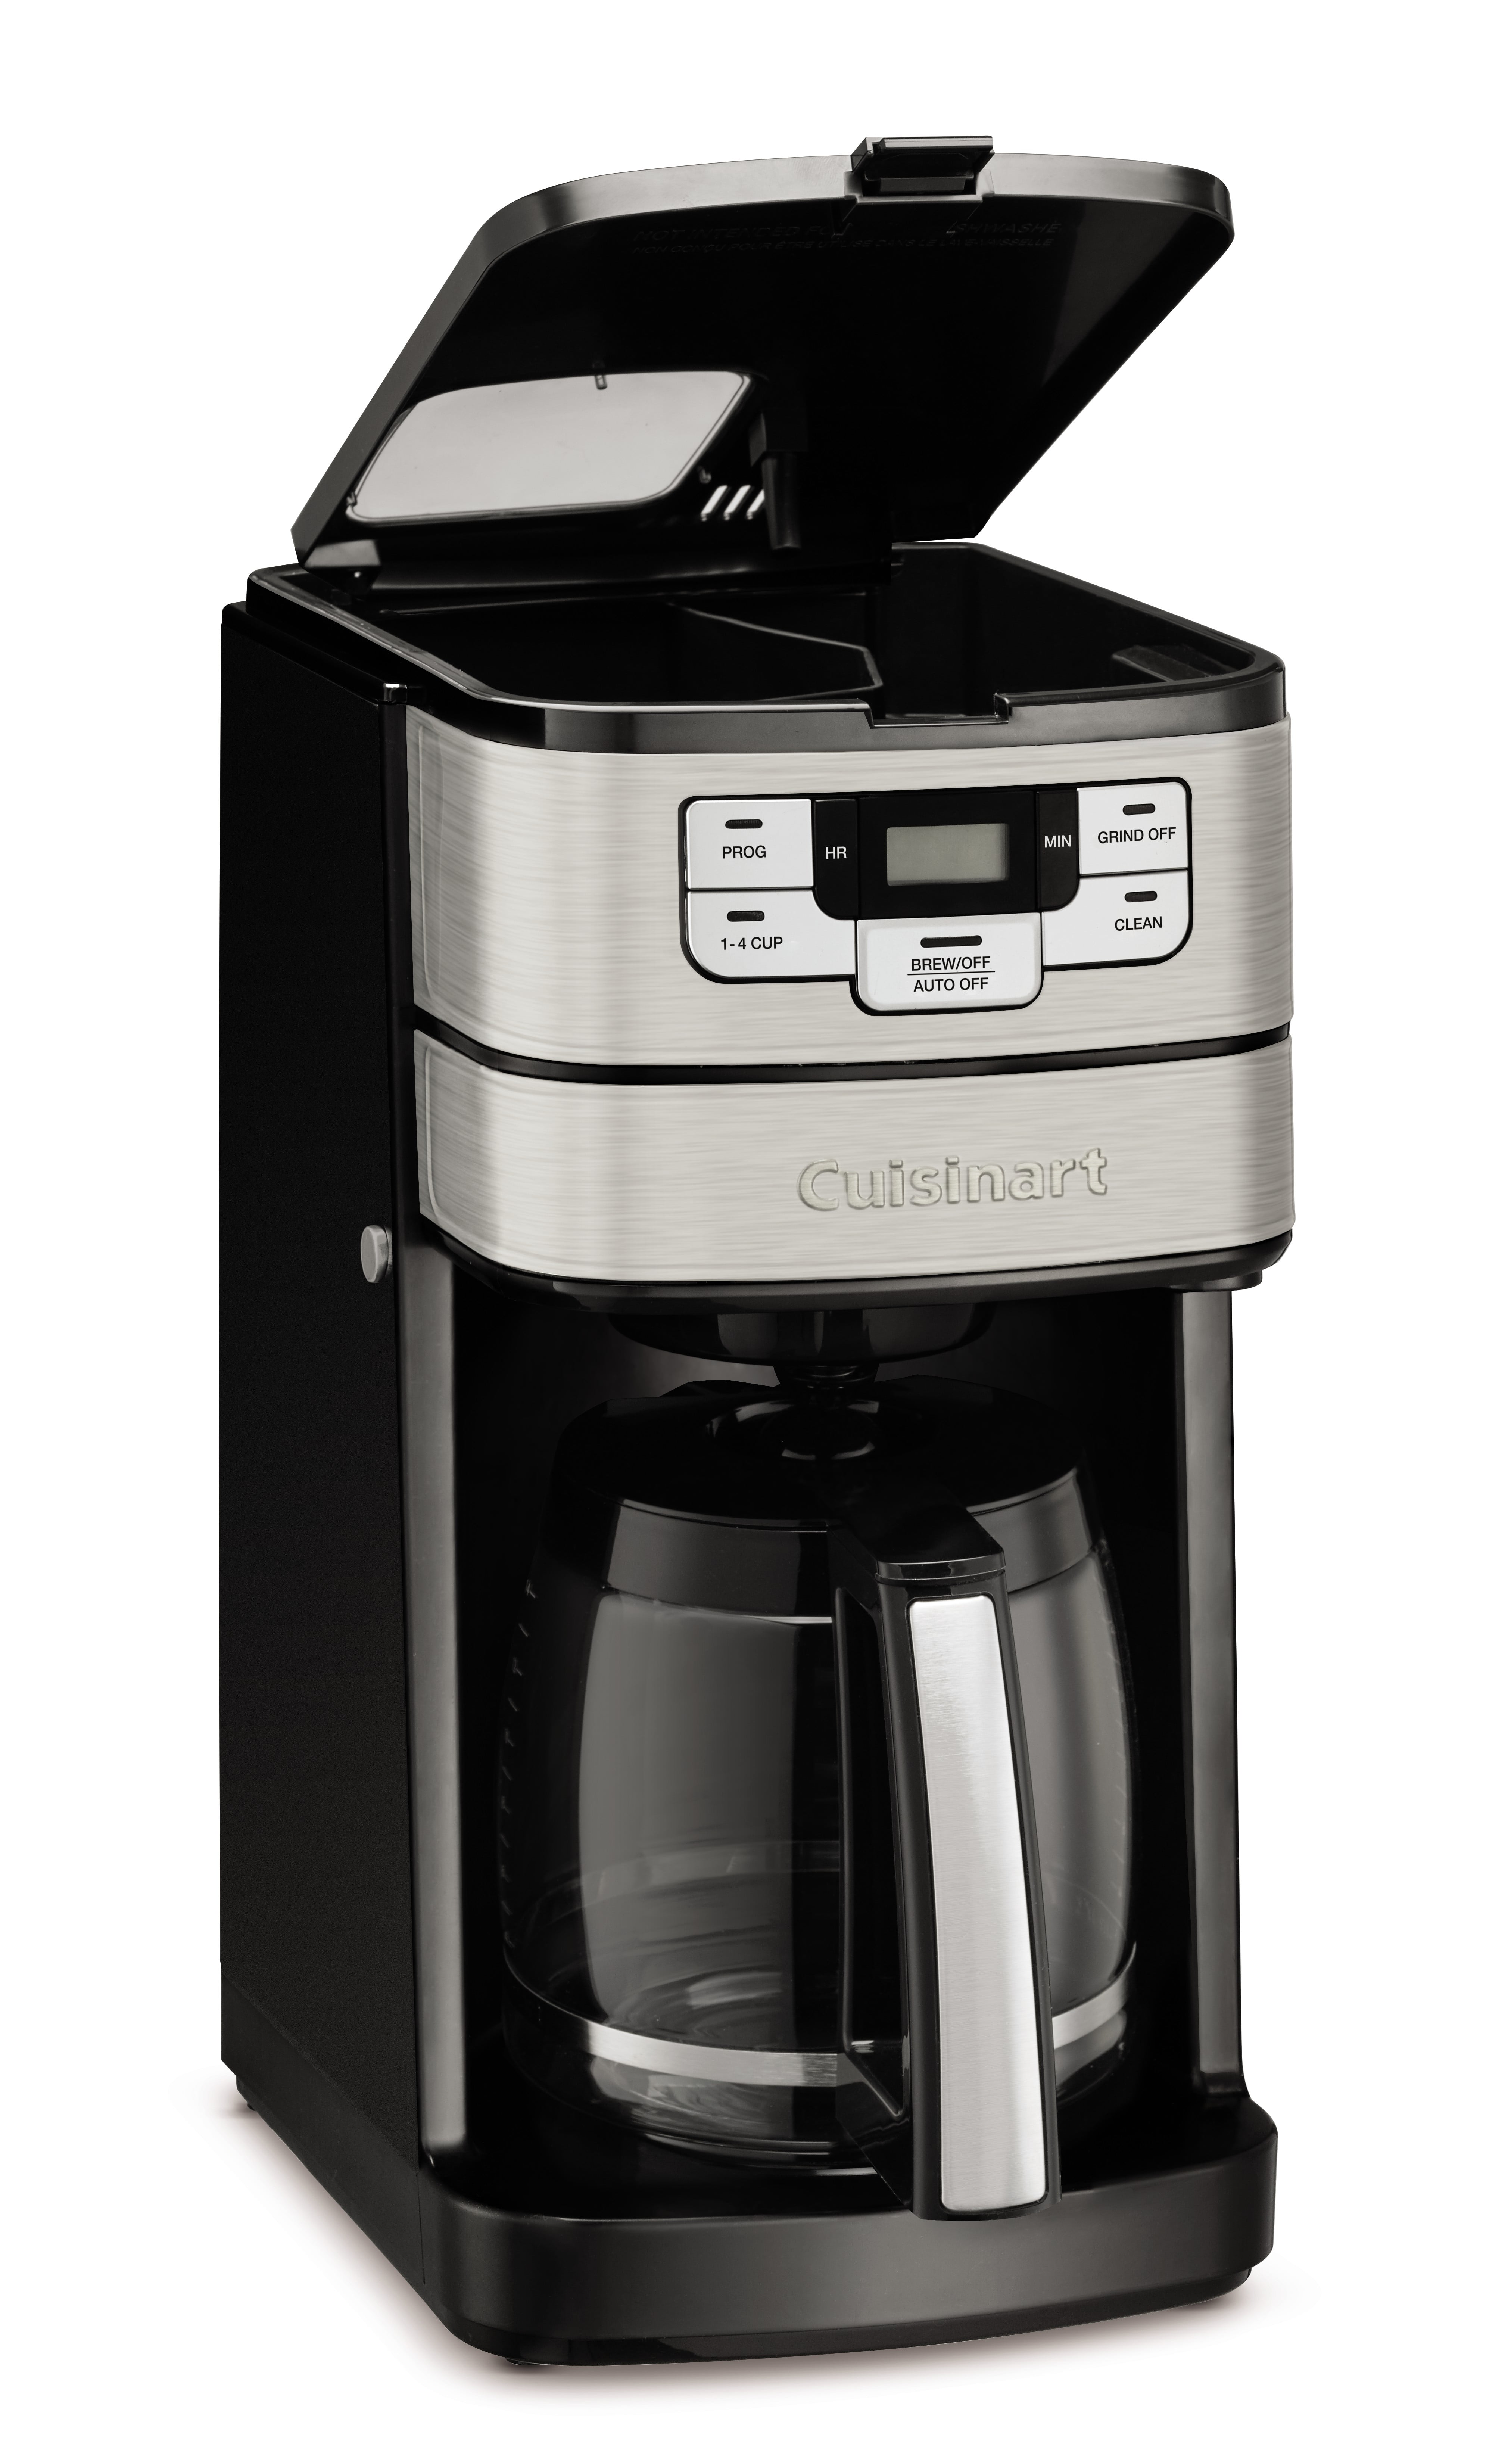 Cuisinart 12 Cup Automatic Grind & Brew Coffeemaker, Black, DGB-400